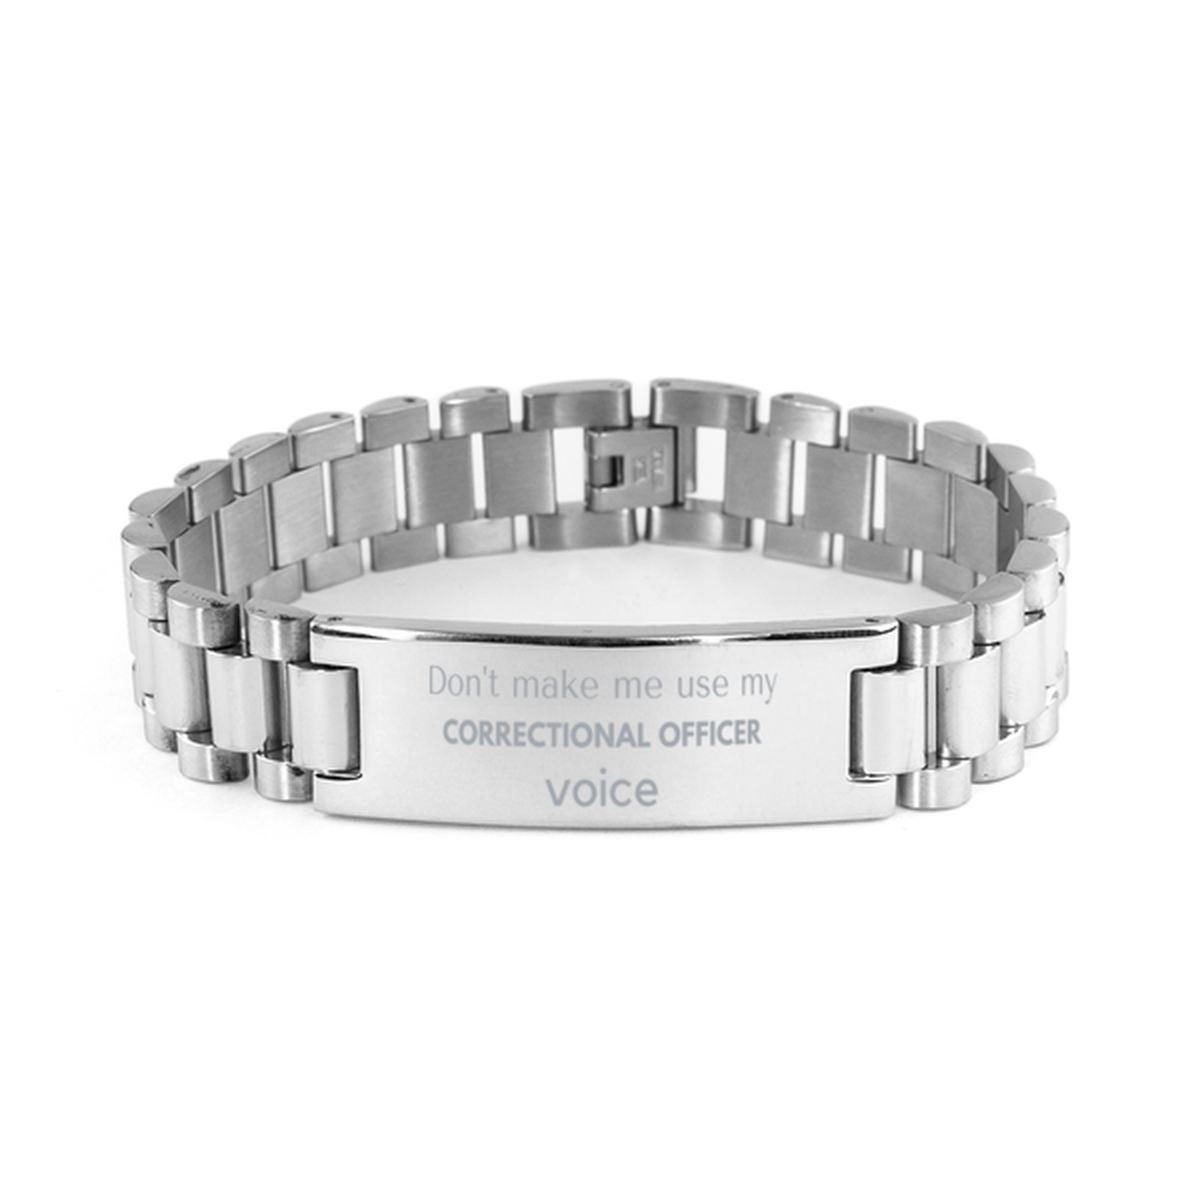 Don't make me use my Correctional Officer voice, Sarcasm Correctional Officer Gifts, Christmas Correctional Officer Ladder Stainless Steel Bracelet Birthday Unique Gifts For Correctional Officer Coworkers, Men, Women, Colleague, Friends